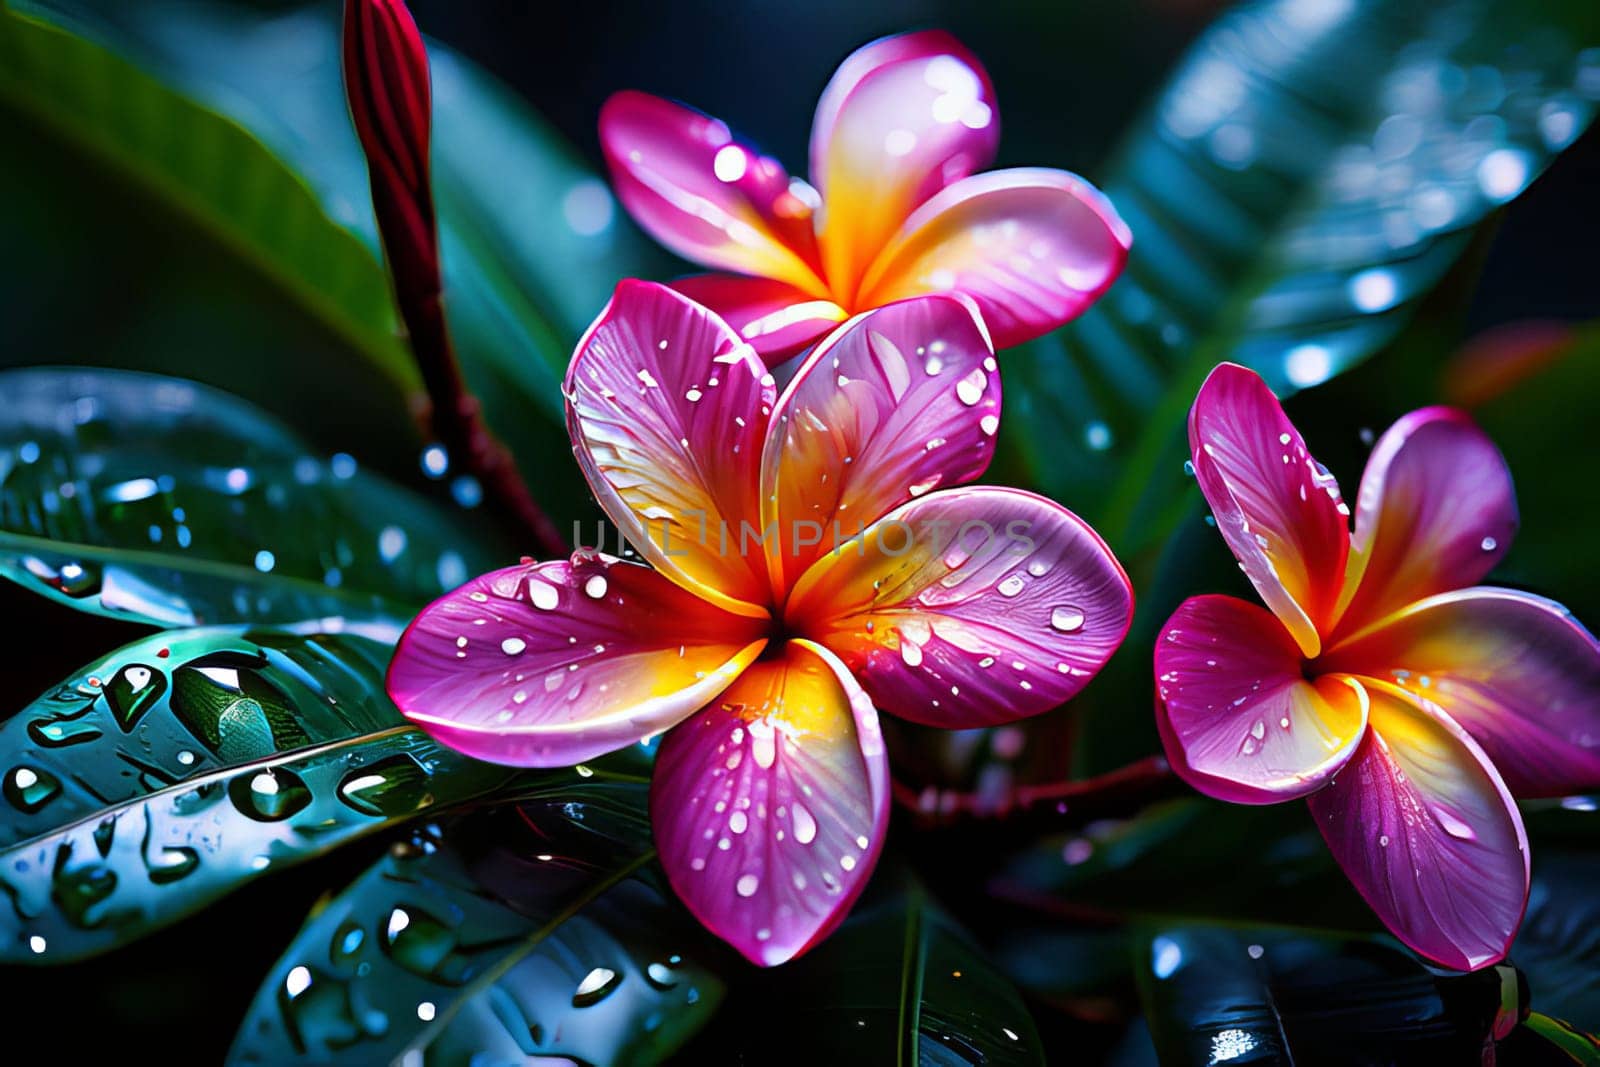 Vibrant Plumeria Flower Covered in Dew Drops Blooming Against a Dark Blue Background by Annu1tochka